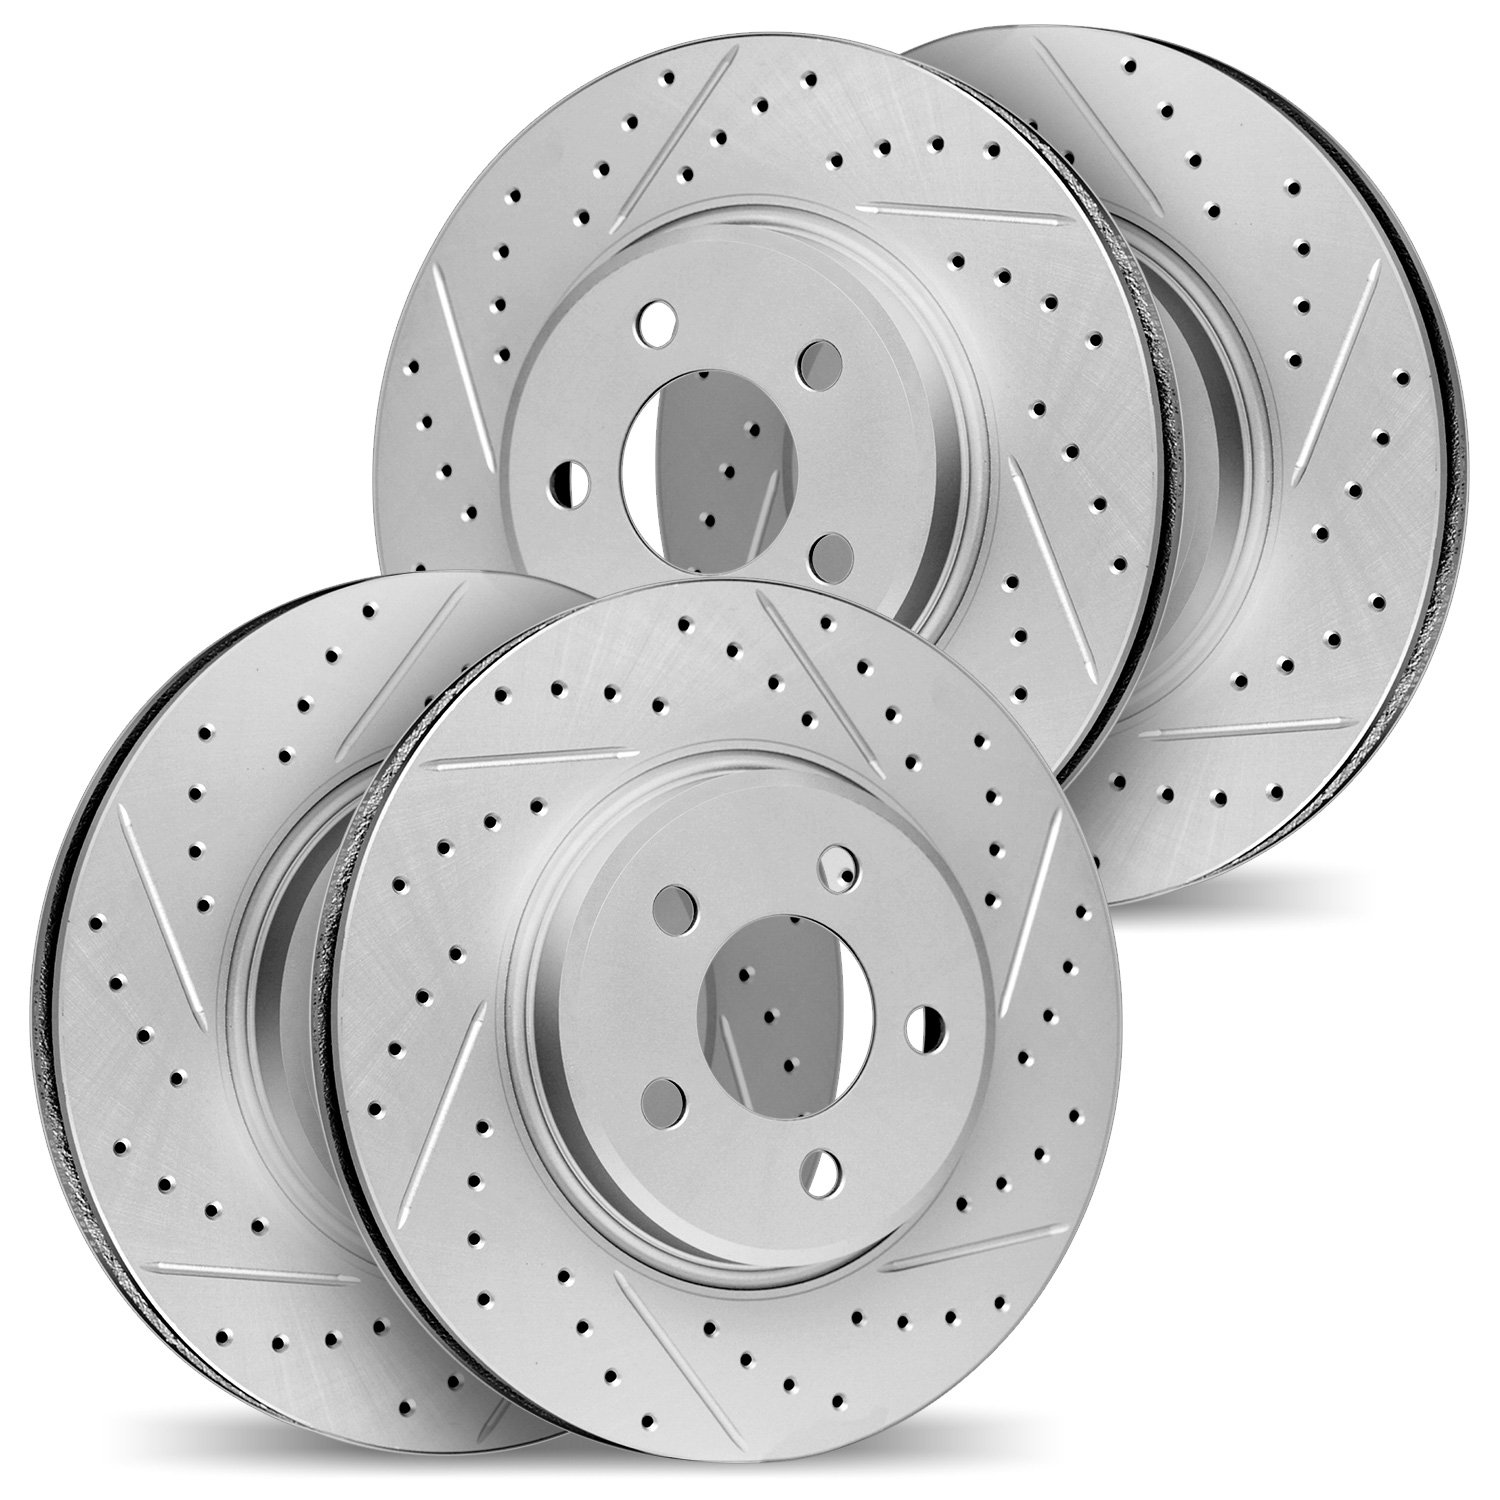 2004-67058 Geoperformance Drilled/Slotted Brake Rotors, 2004-2017 Infiniti/Nissan, Position: Front and Rear